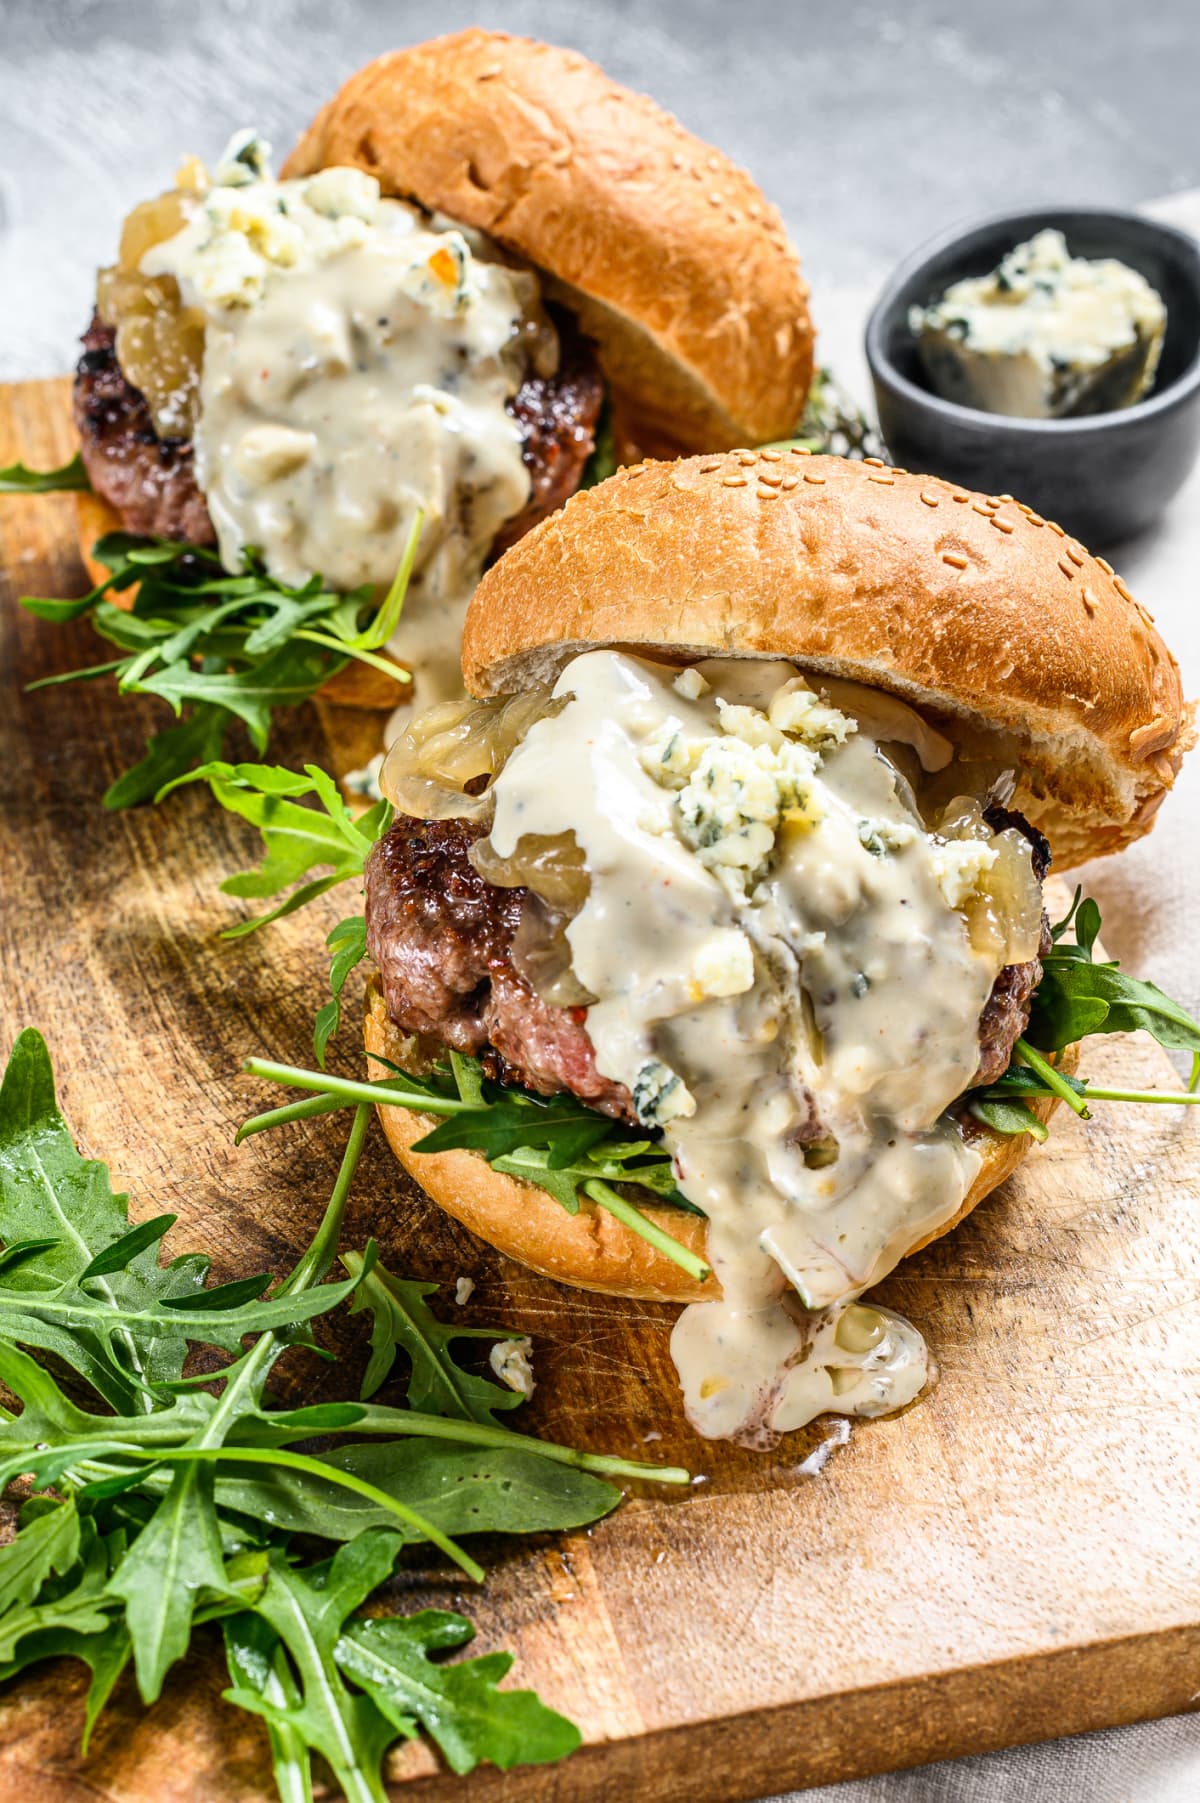 Delicious burgers with blue cheese, marbled beef, onions, and arugula. 